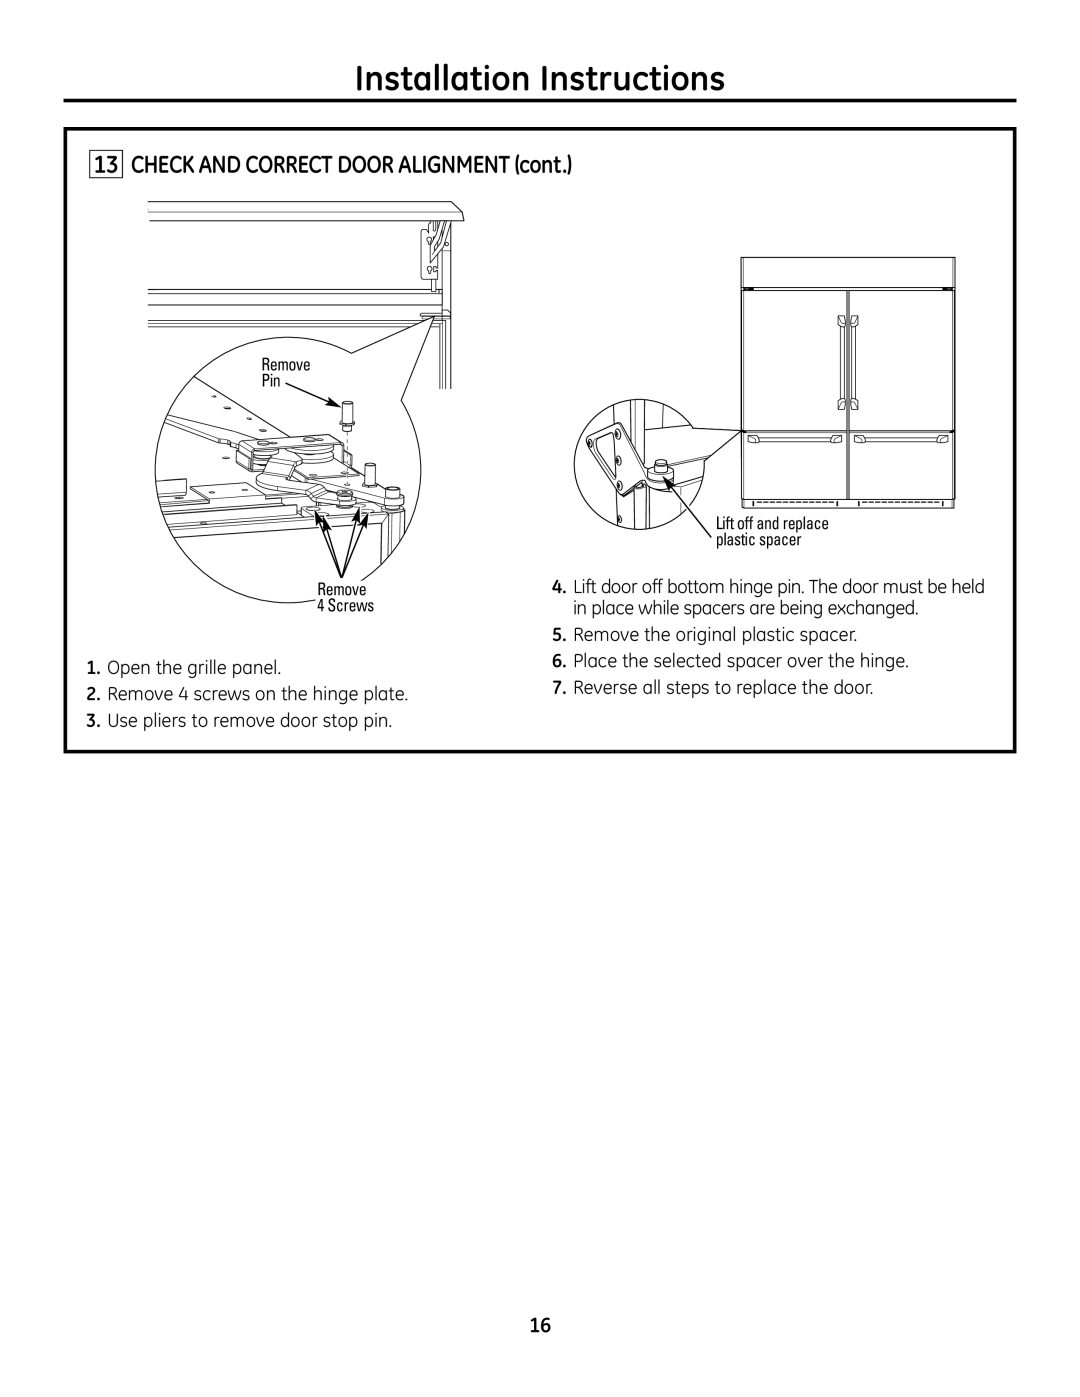 GE ZICP720 installation instructions Installation Instructions, CHECK AND CORRECT DOOR ALIGNMENT cont 